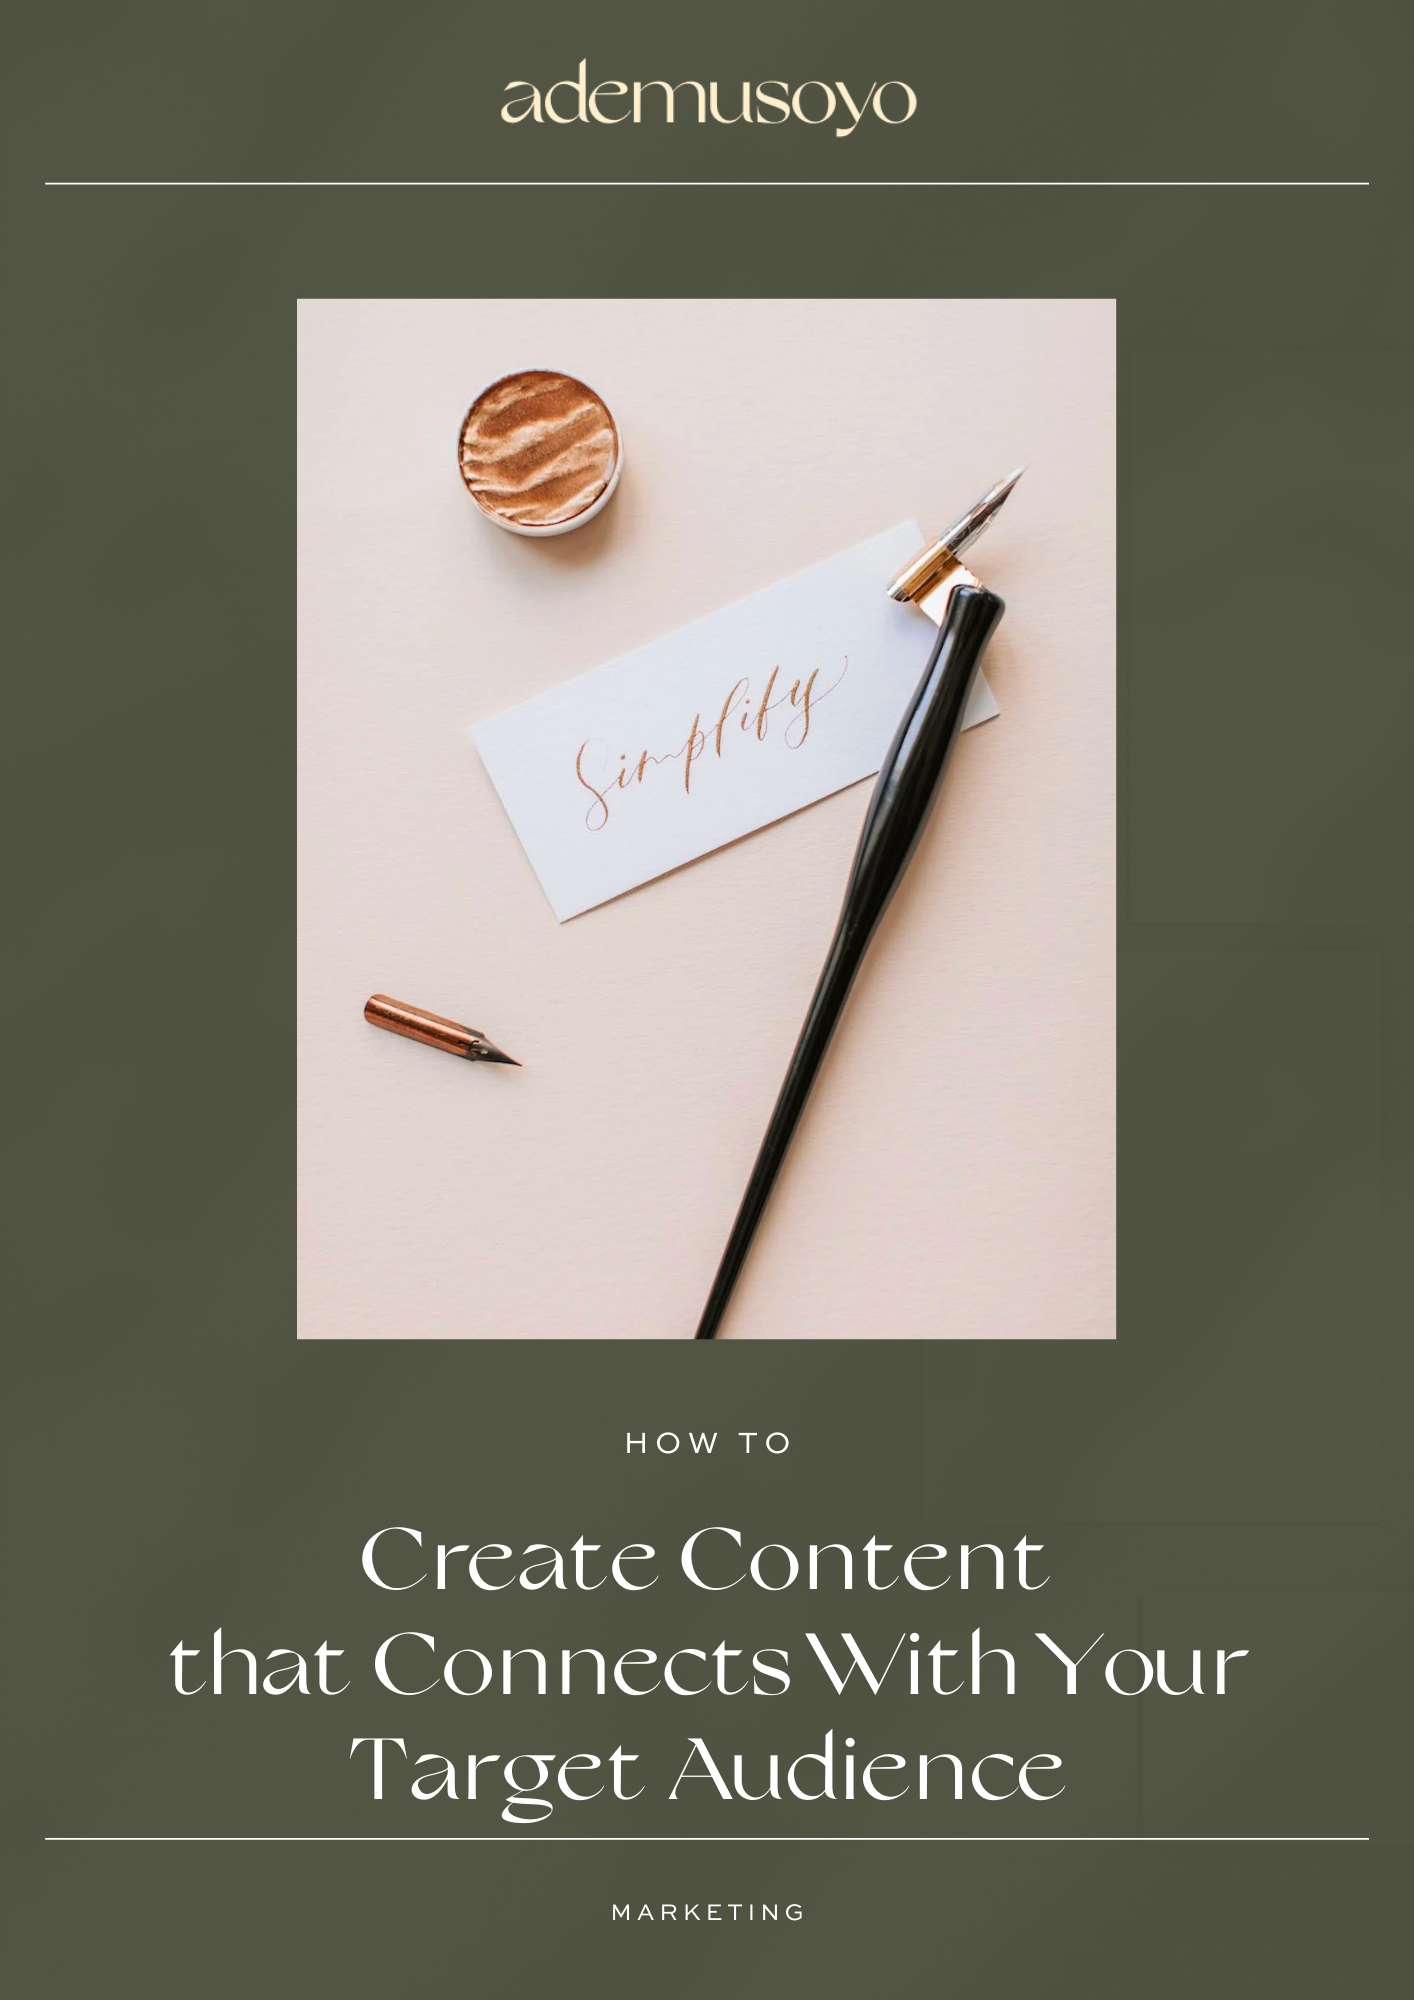 How to Create Content that Connects With Your Target Audience